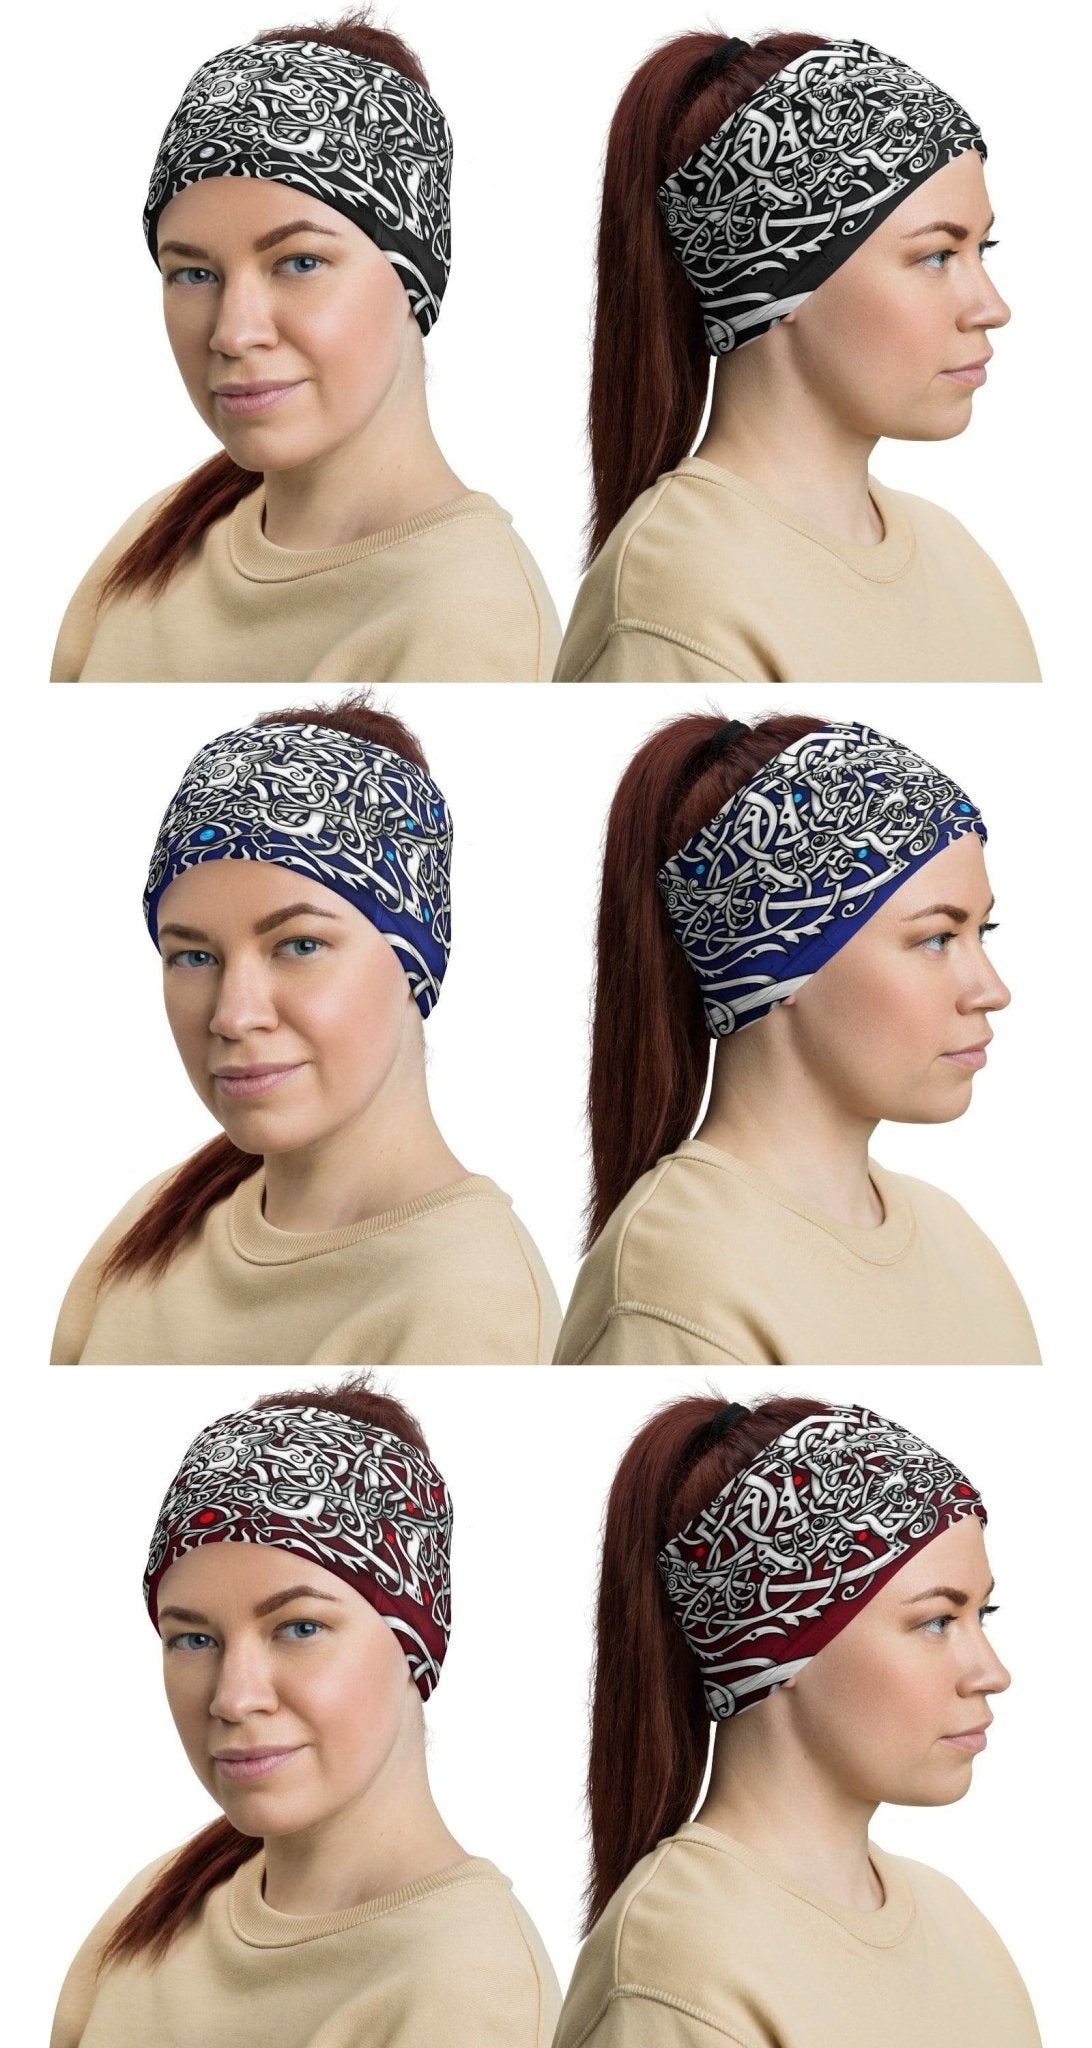 Viking Neck Gaiter, Face Mask, Head Covering, Celtic, Yggdrasil, Tree of Life Nordic Art - White & 3 Color Options - Abysm Internal